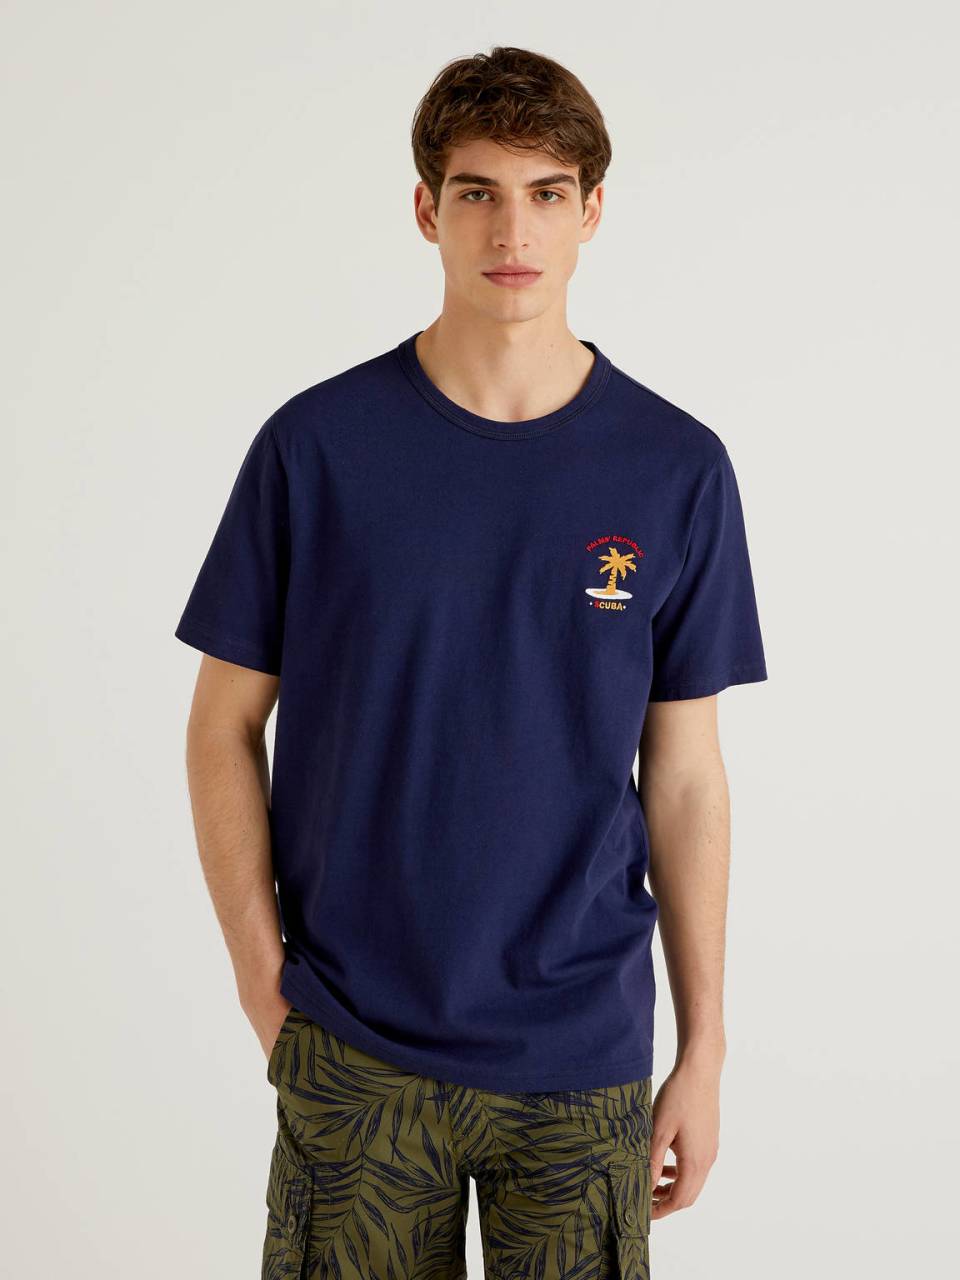 Benetton Pure cotton t-shirt with embroidery. 1